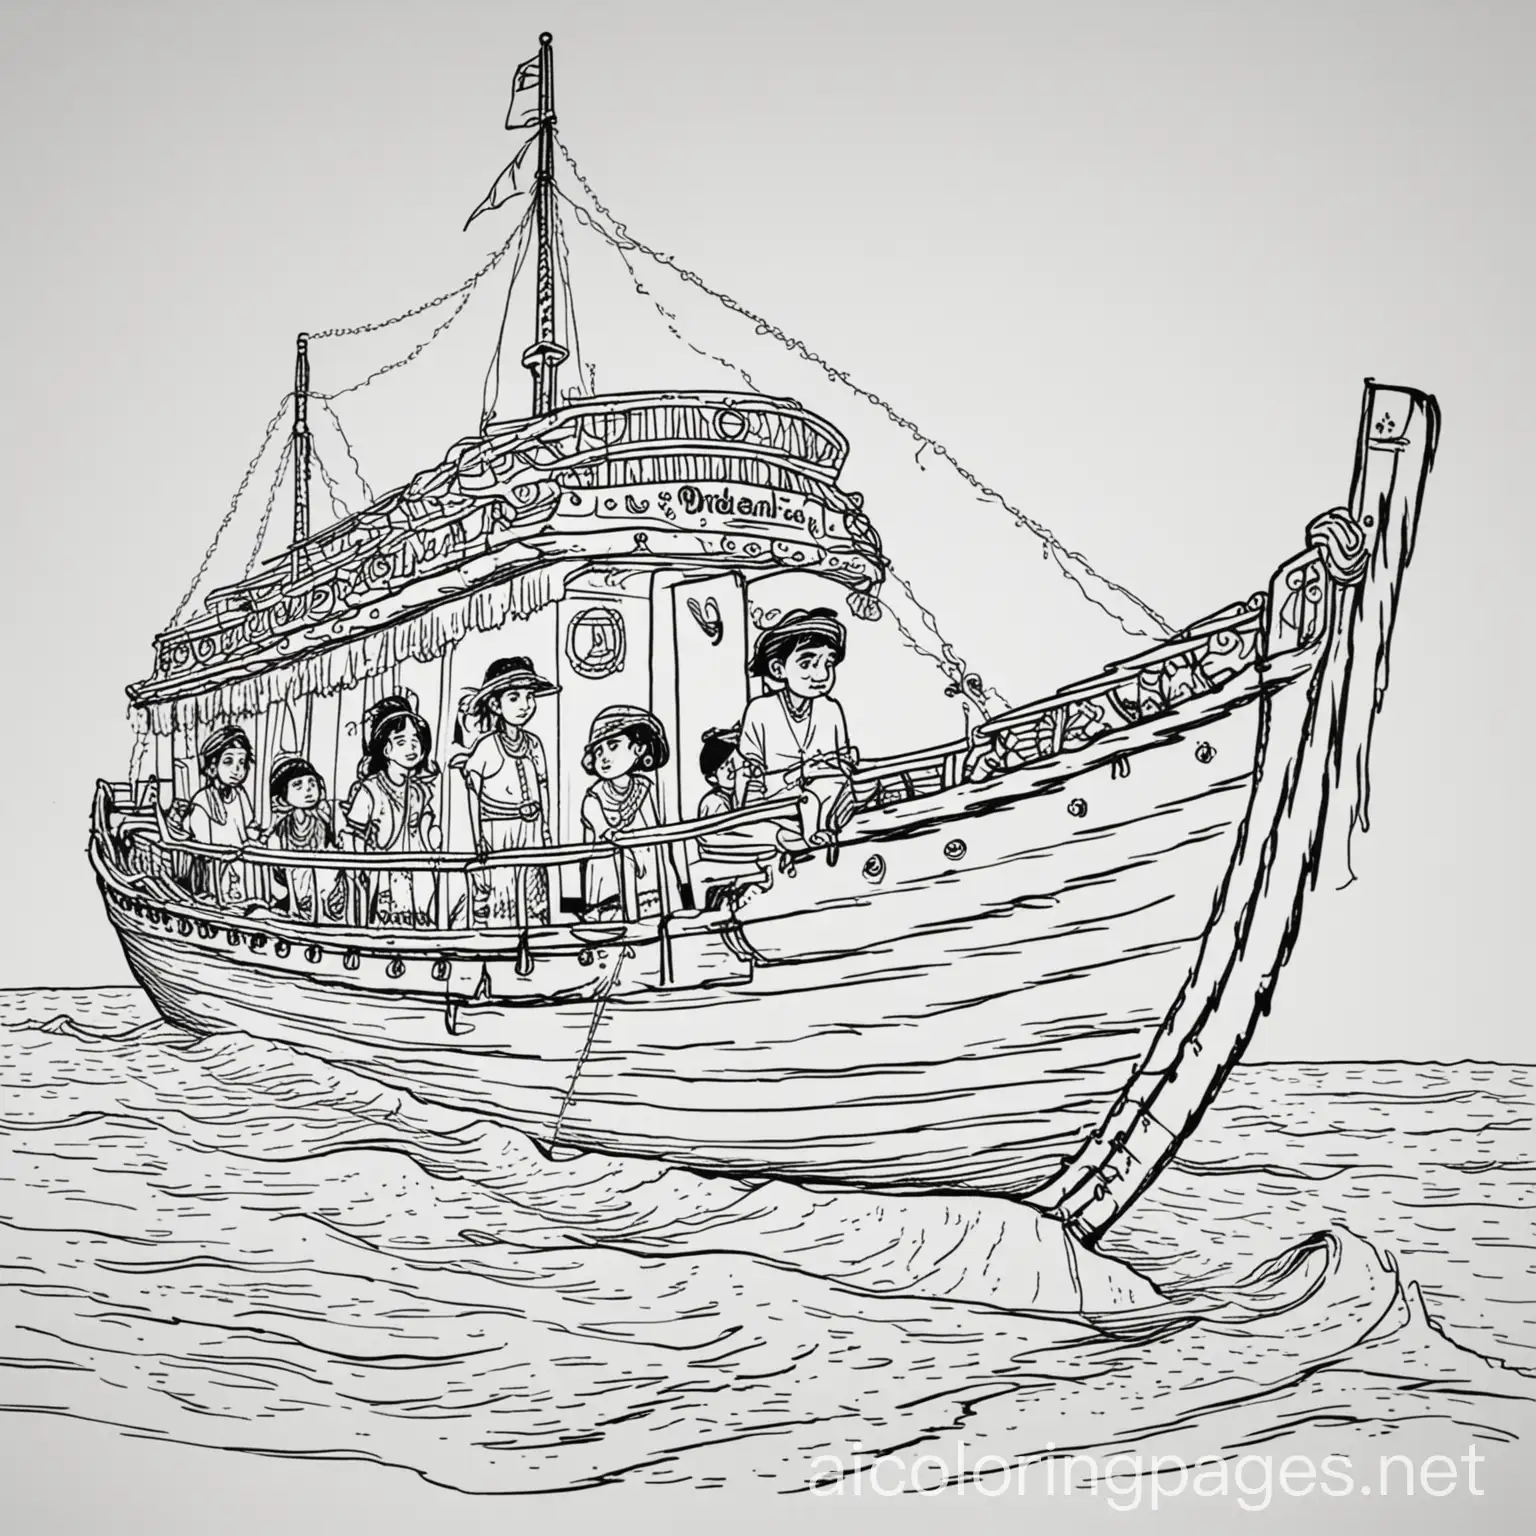 Indian-Arrival-Day-Boat-Coloring-Page-Simple-Line-Art-on-White-Background